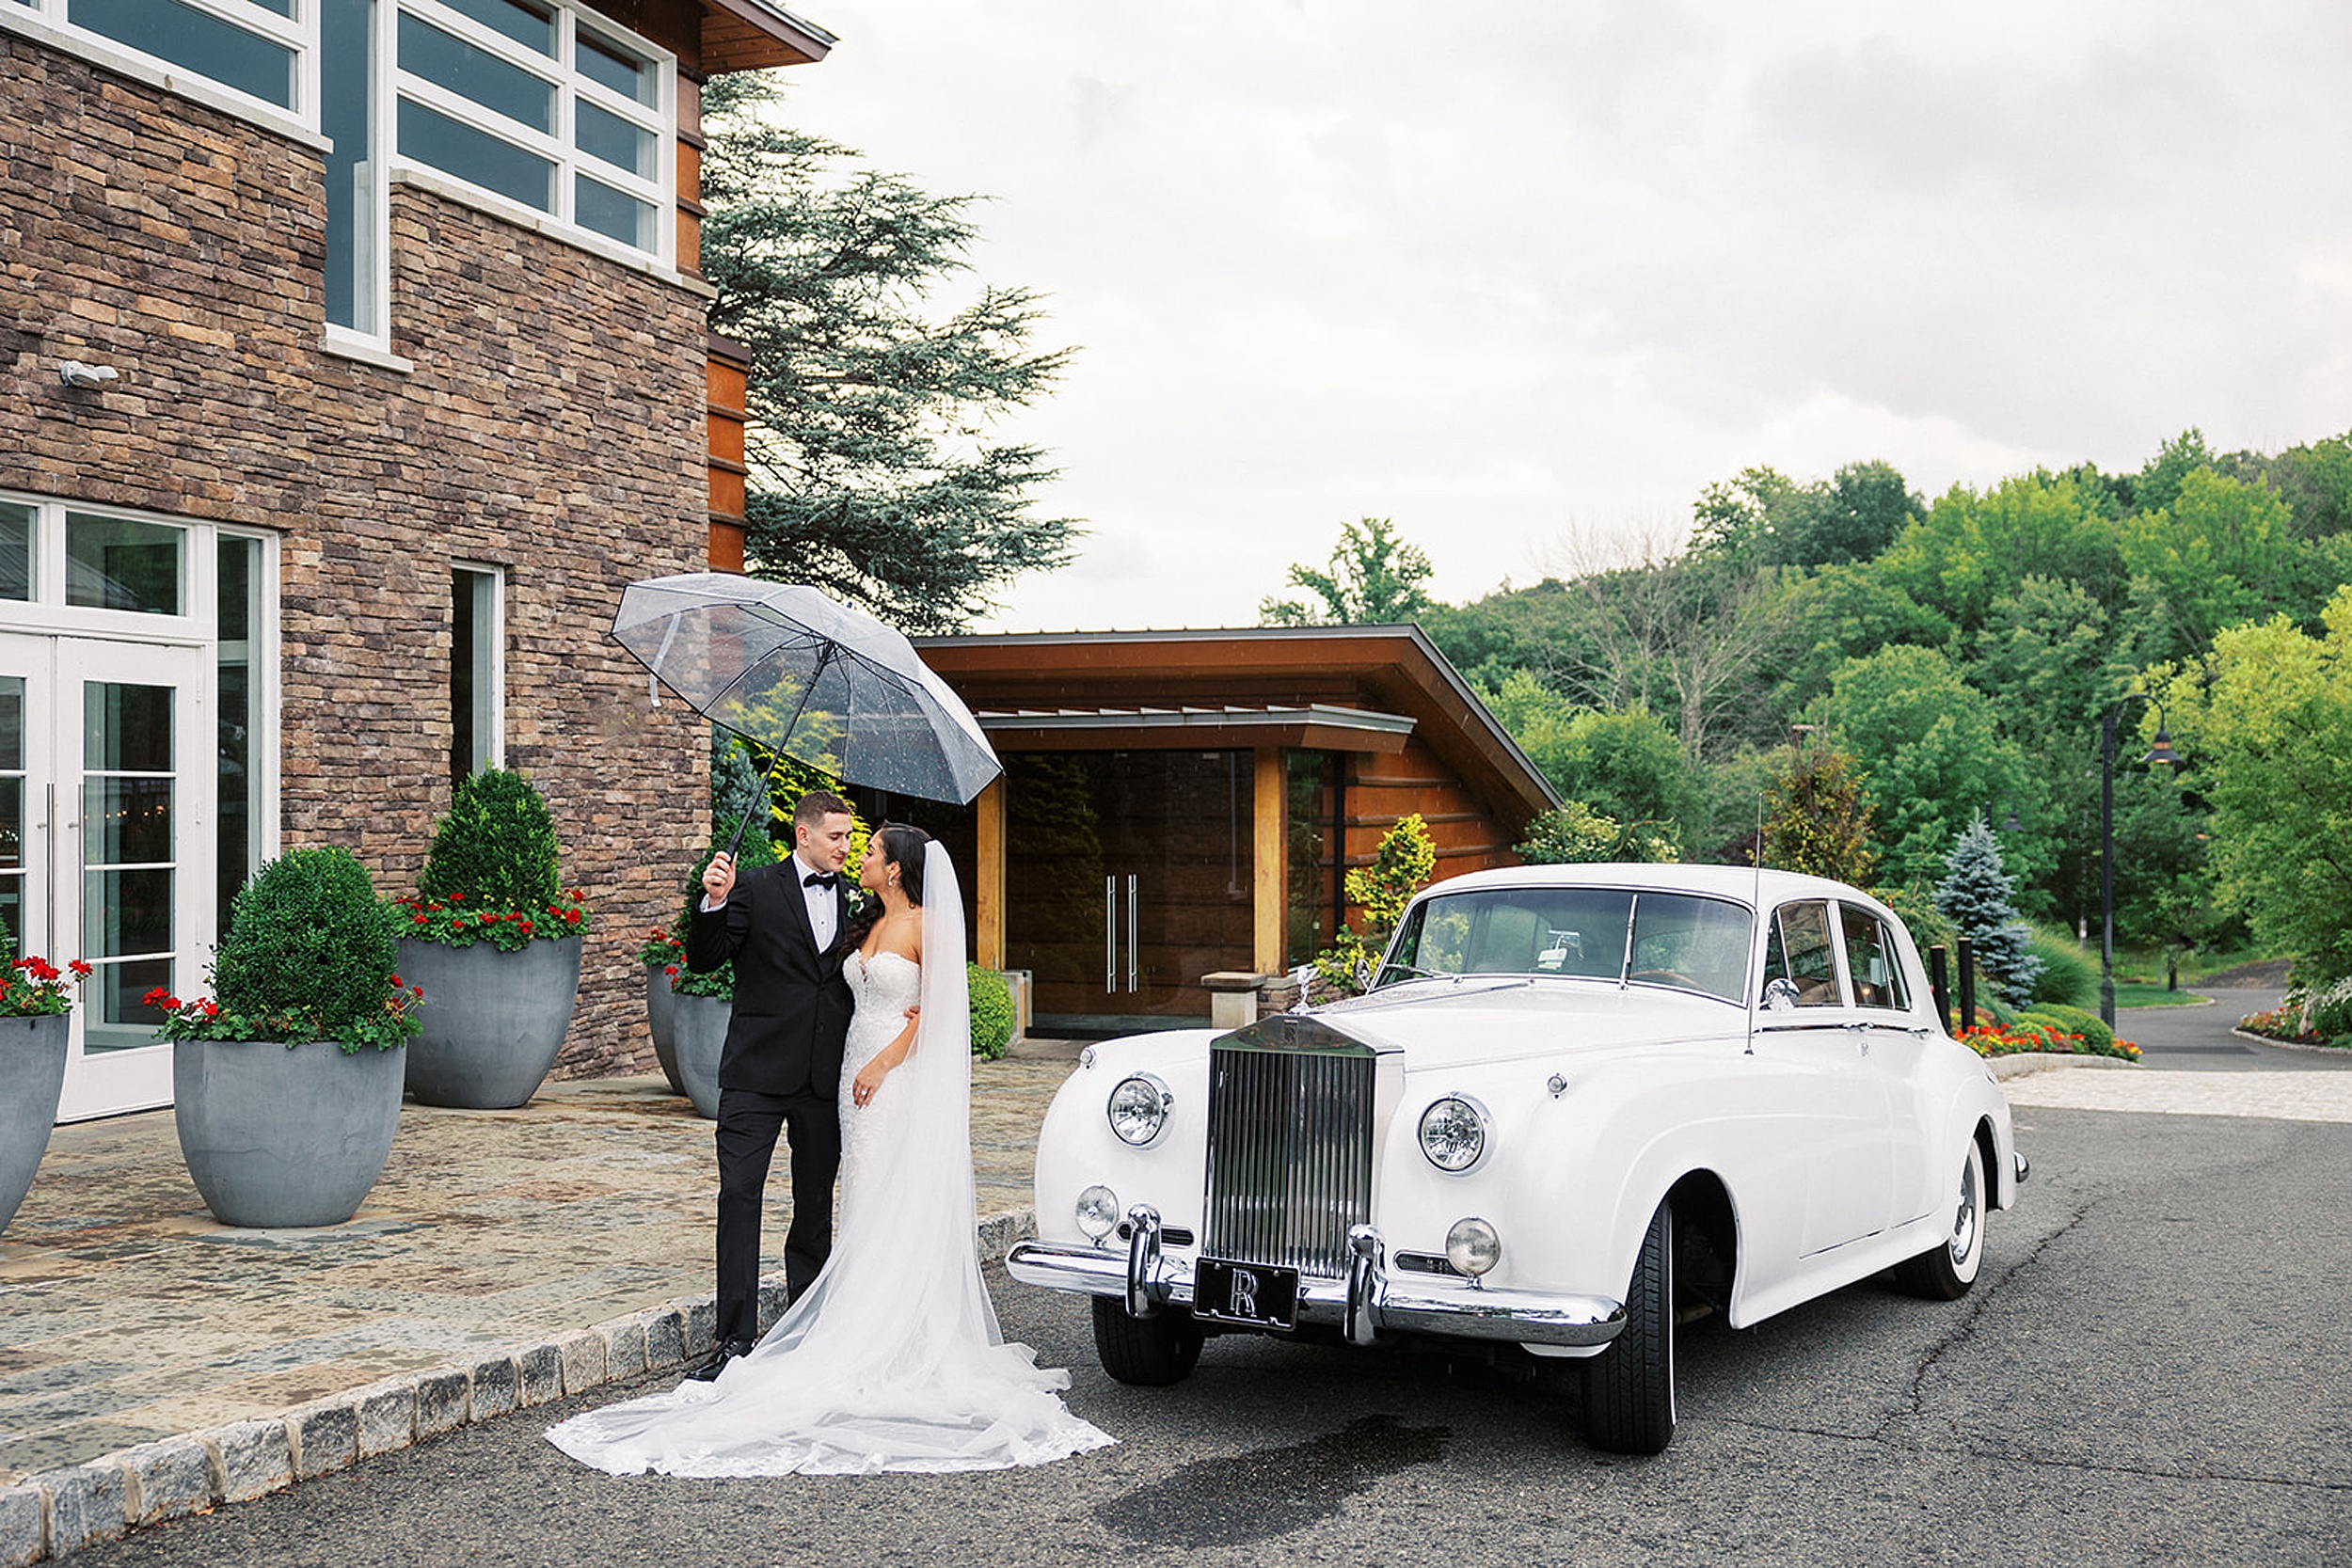 Newlyweds kiss under and umbrella while standing next to a white Rolls Royce limo